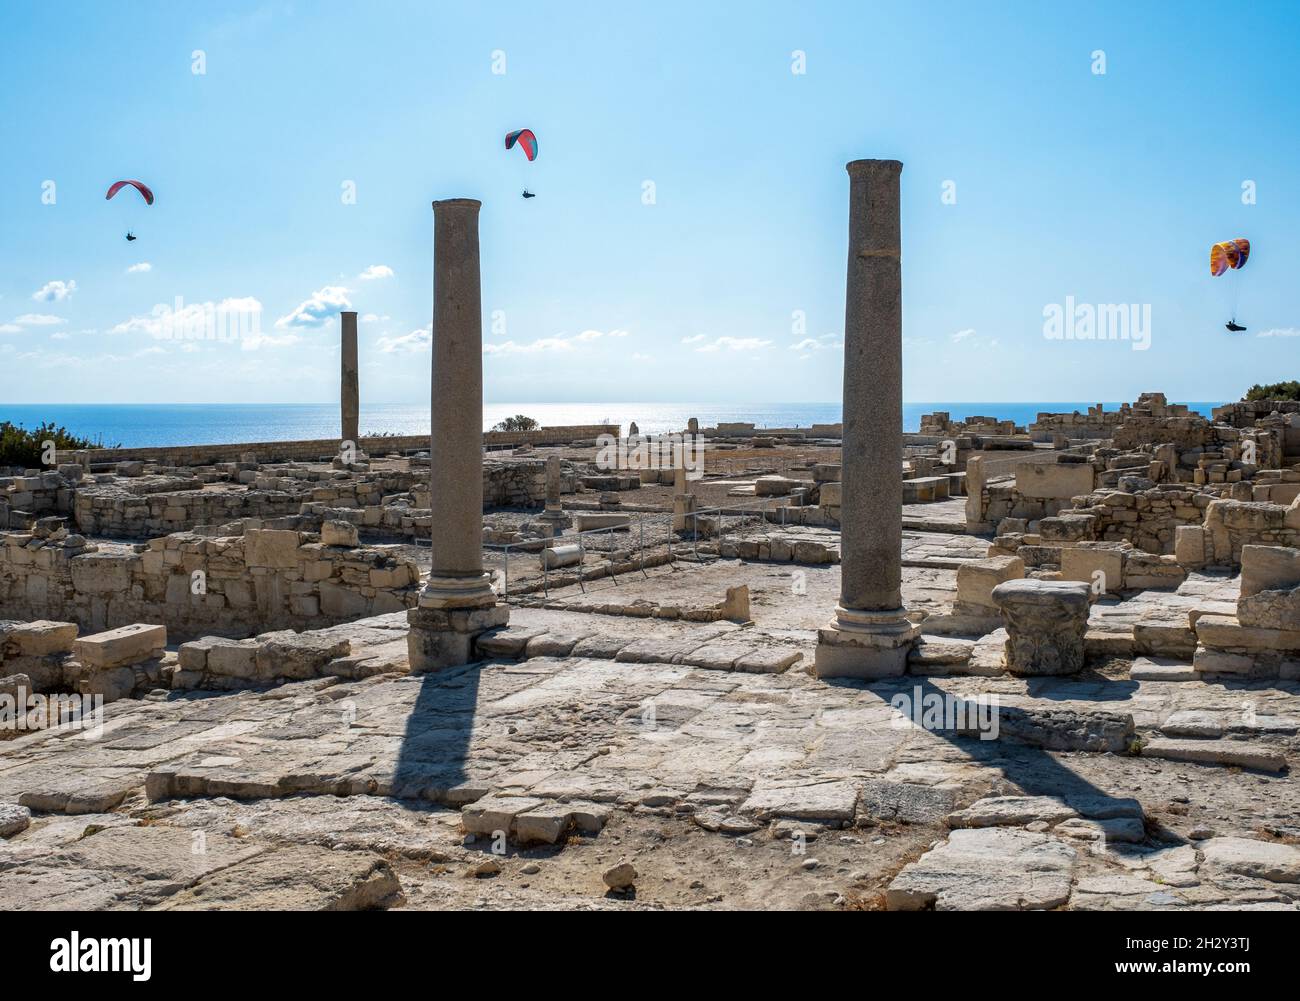 Paragliders glide over the early Christian Basilica ruins at the Archaeological Site of Kourion, Cyprus. Stock Photo